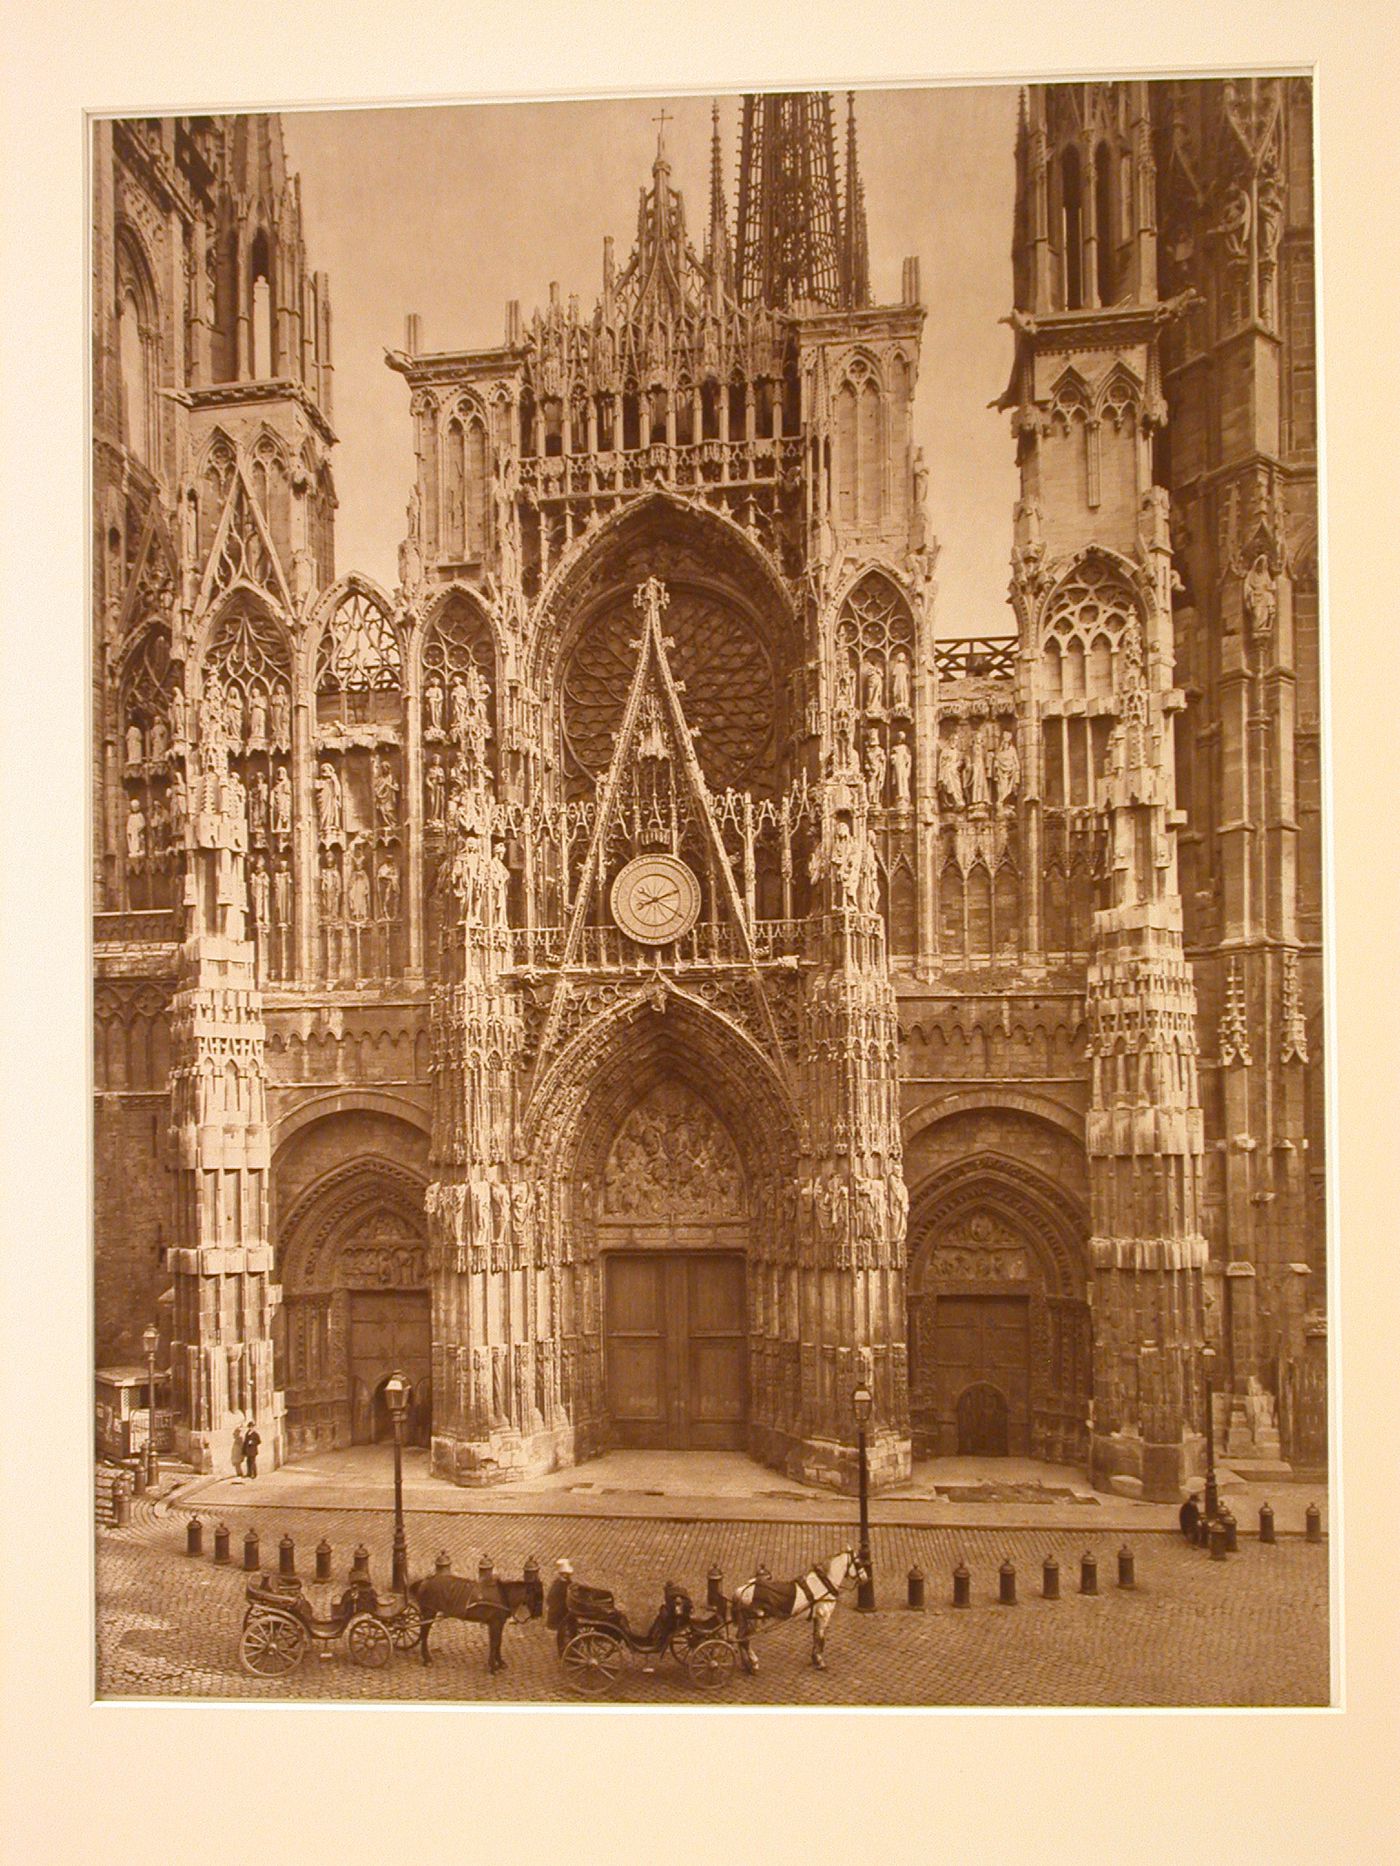 Detail, exterior view of façade, central portals, and part of towers, Rouen, France